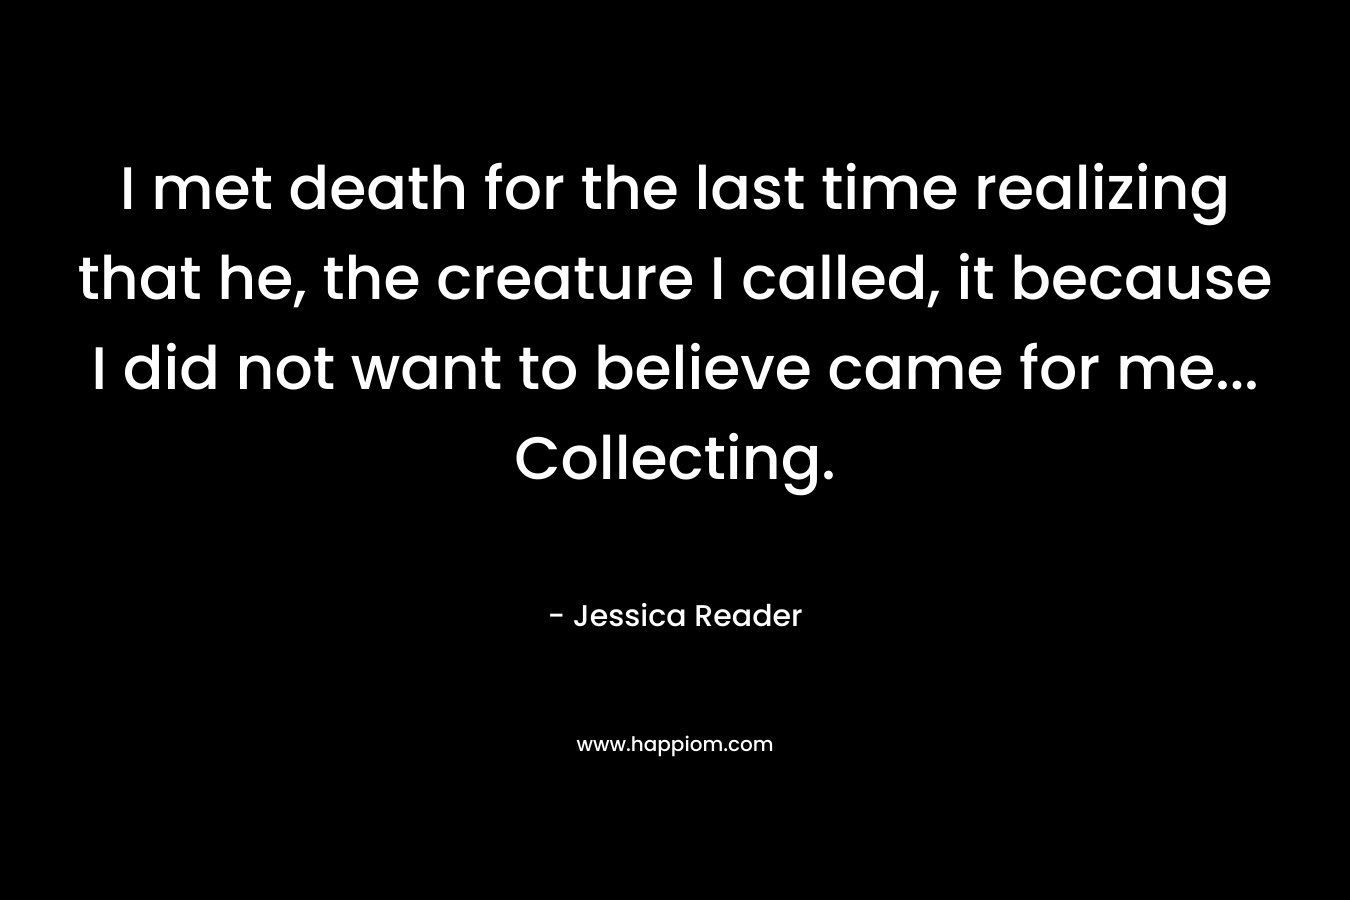 I met death for the last time realizing that he, the creature I called, it because I did not want to believe came for me... Collecting.